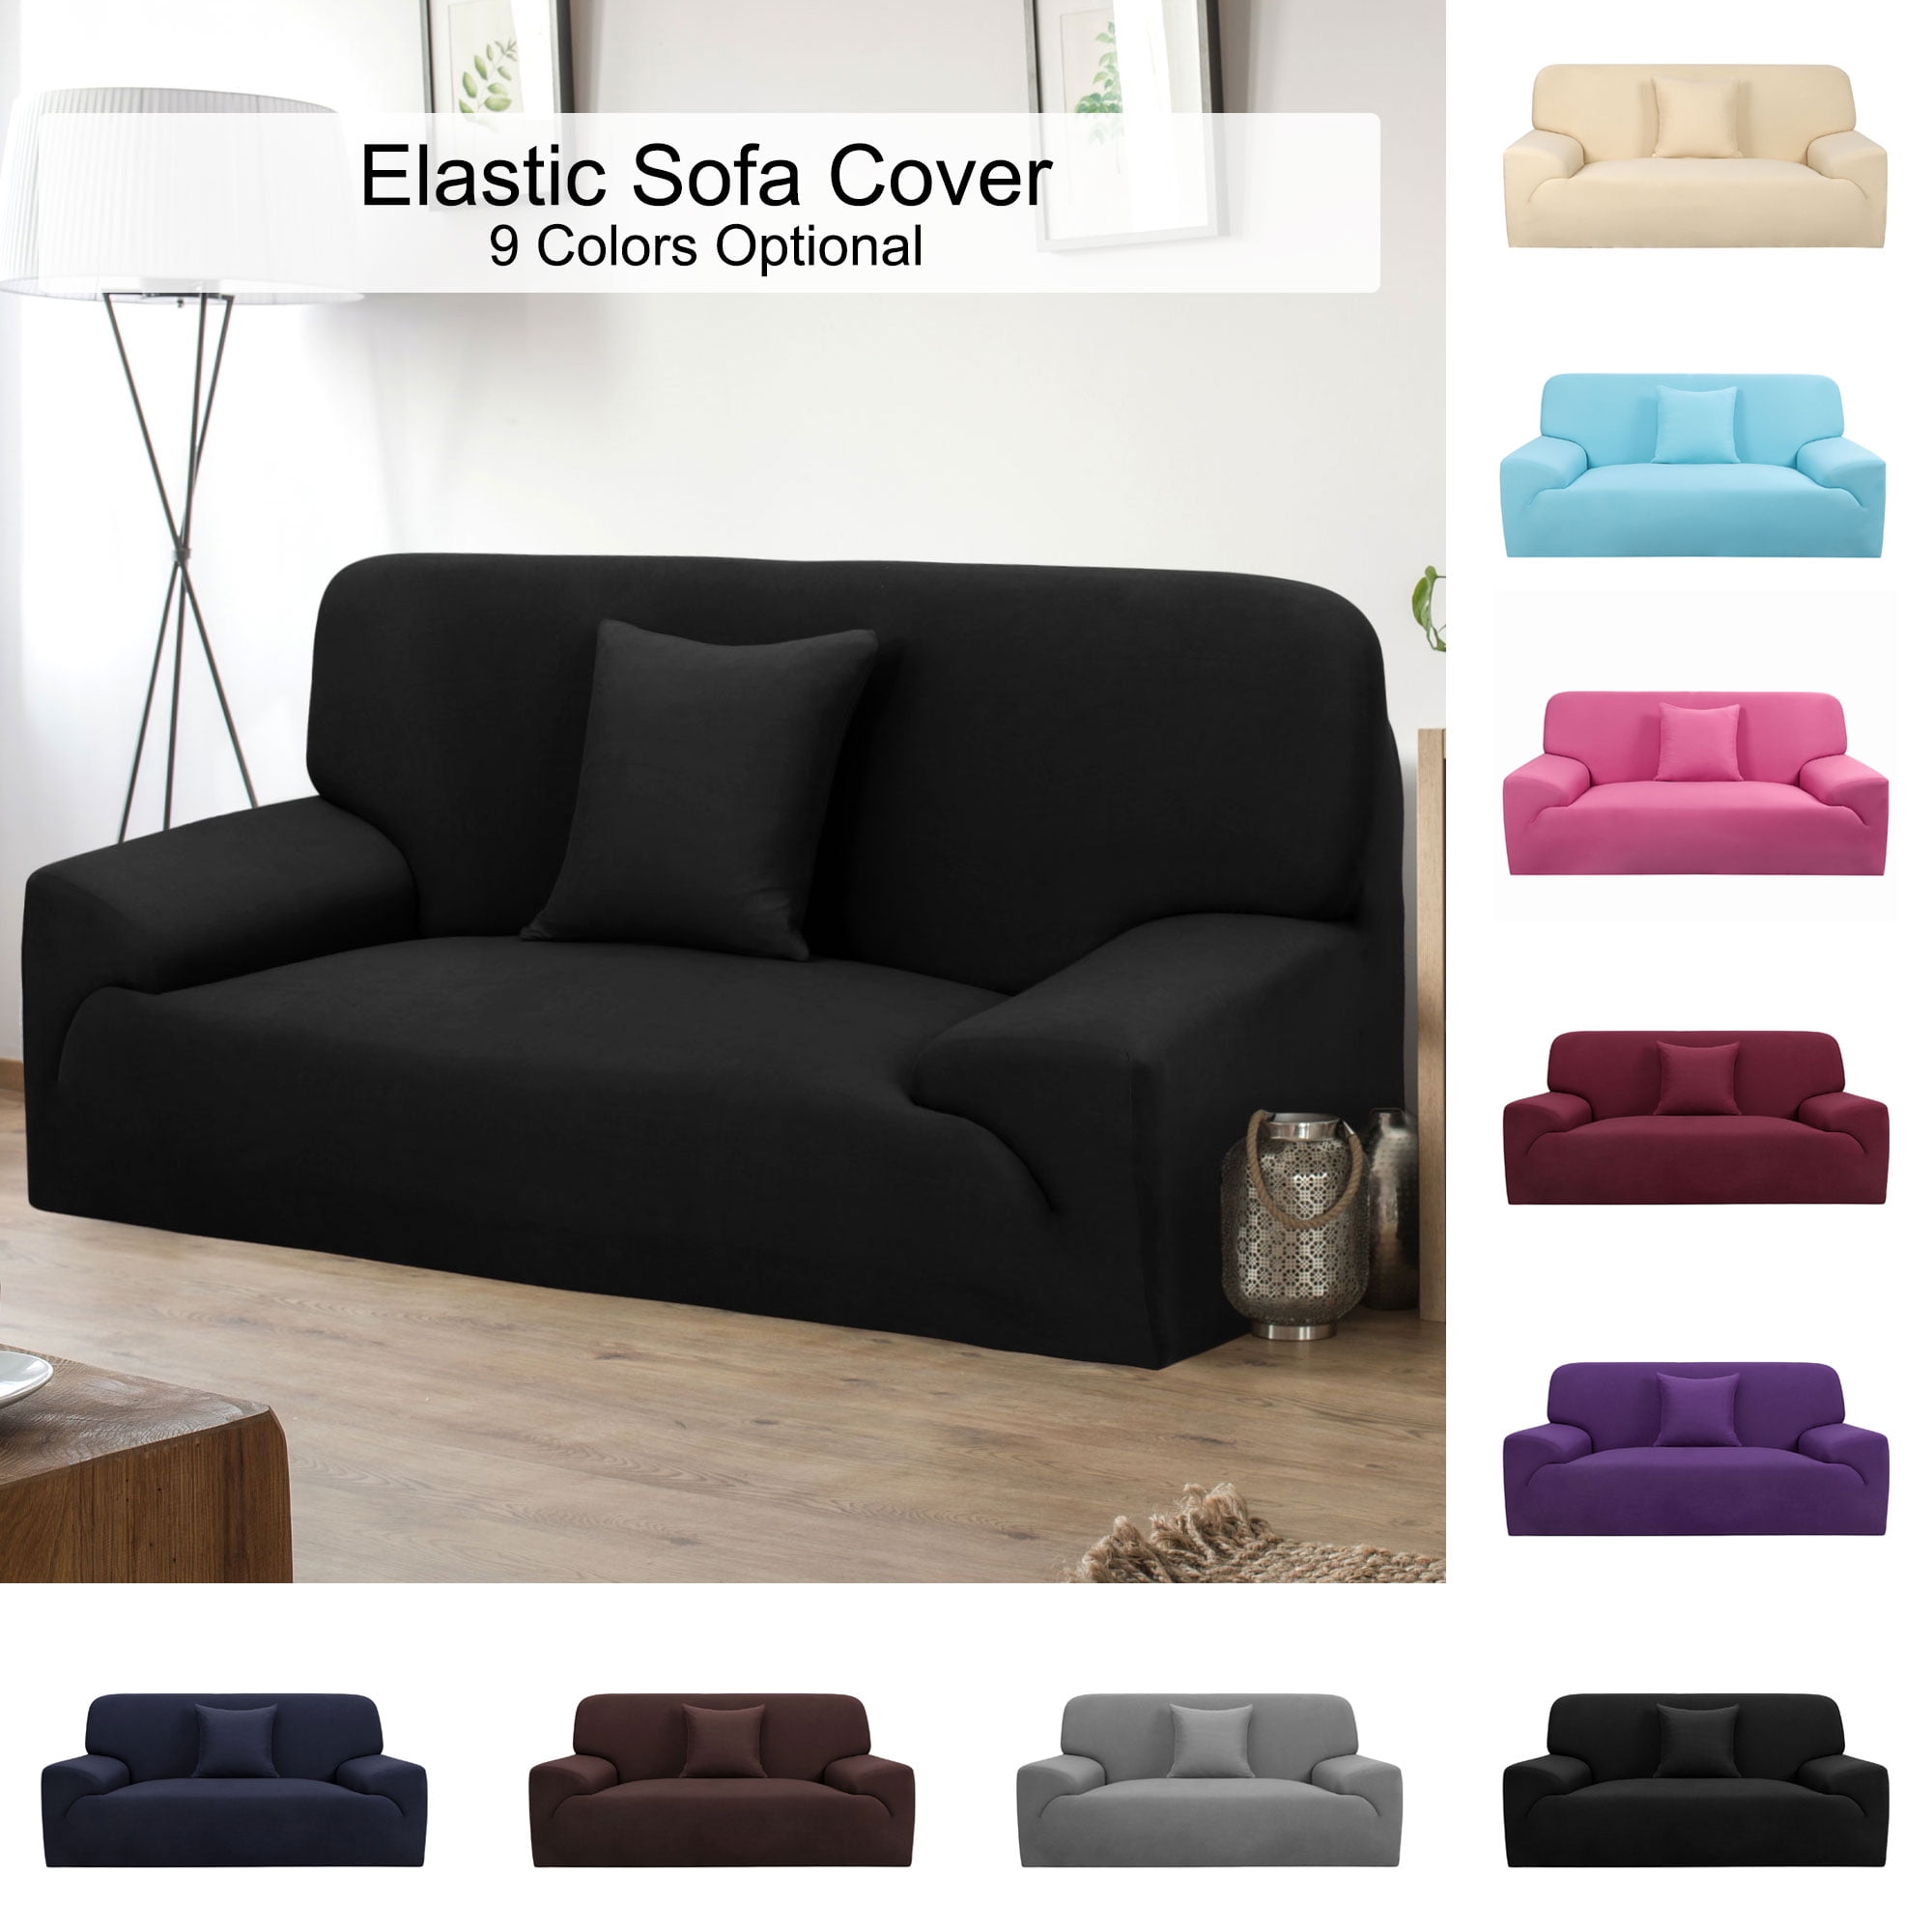 Details about   Stretch Slipcover Sofa Cover Cushion Couch Pillow Case Furniture Home Decor US 